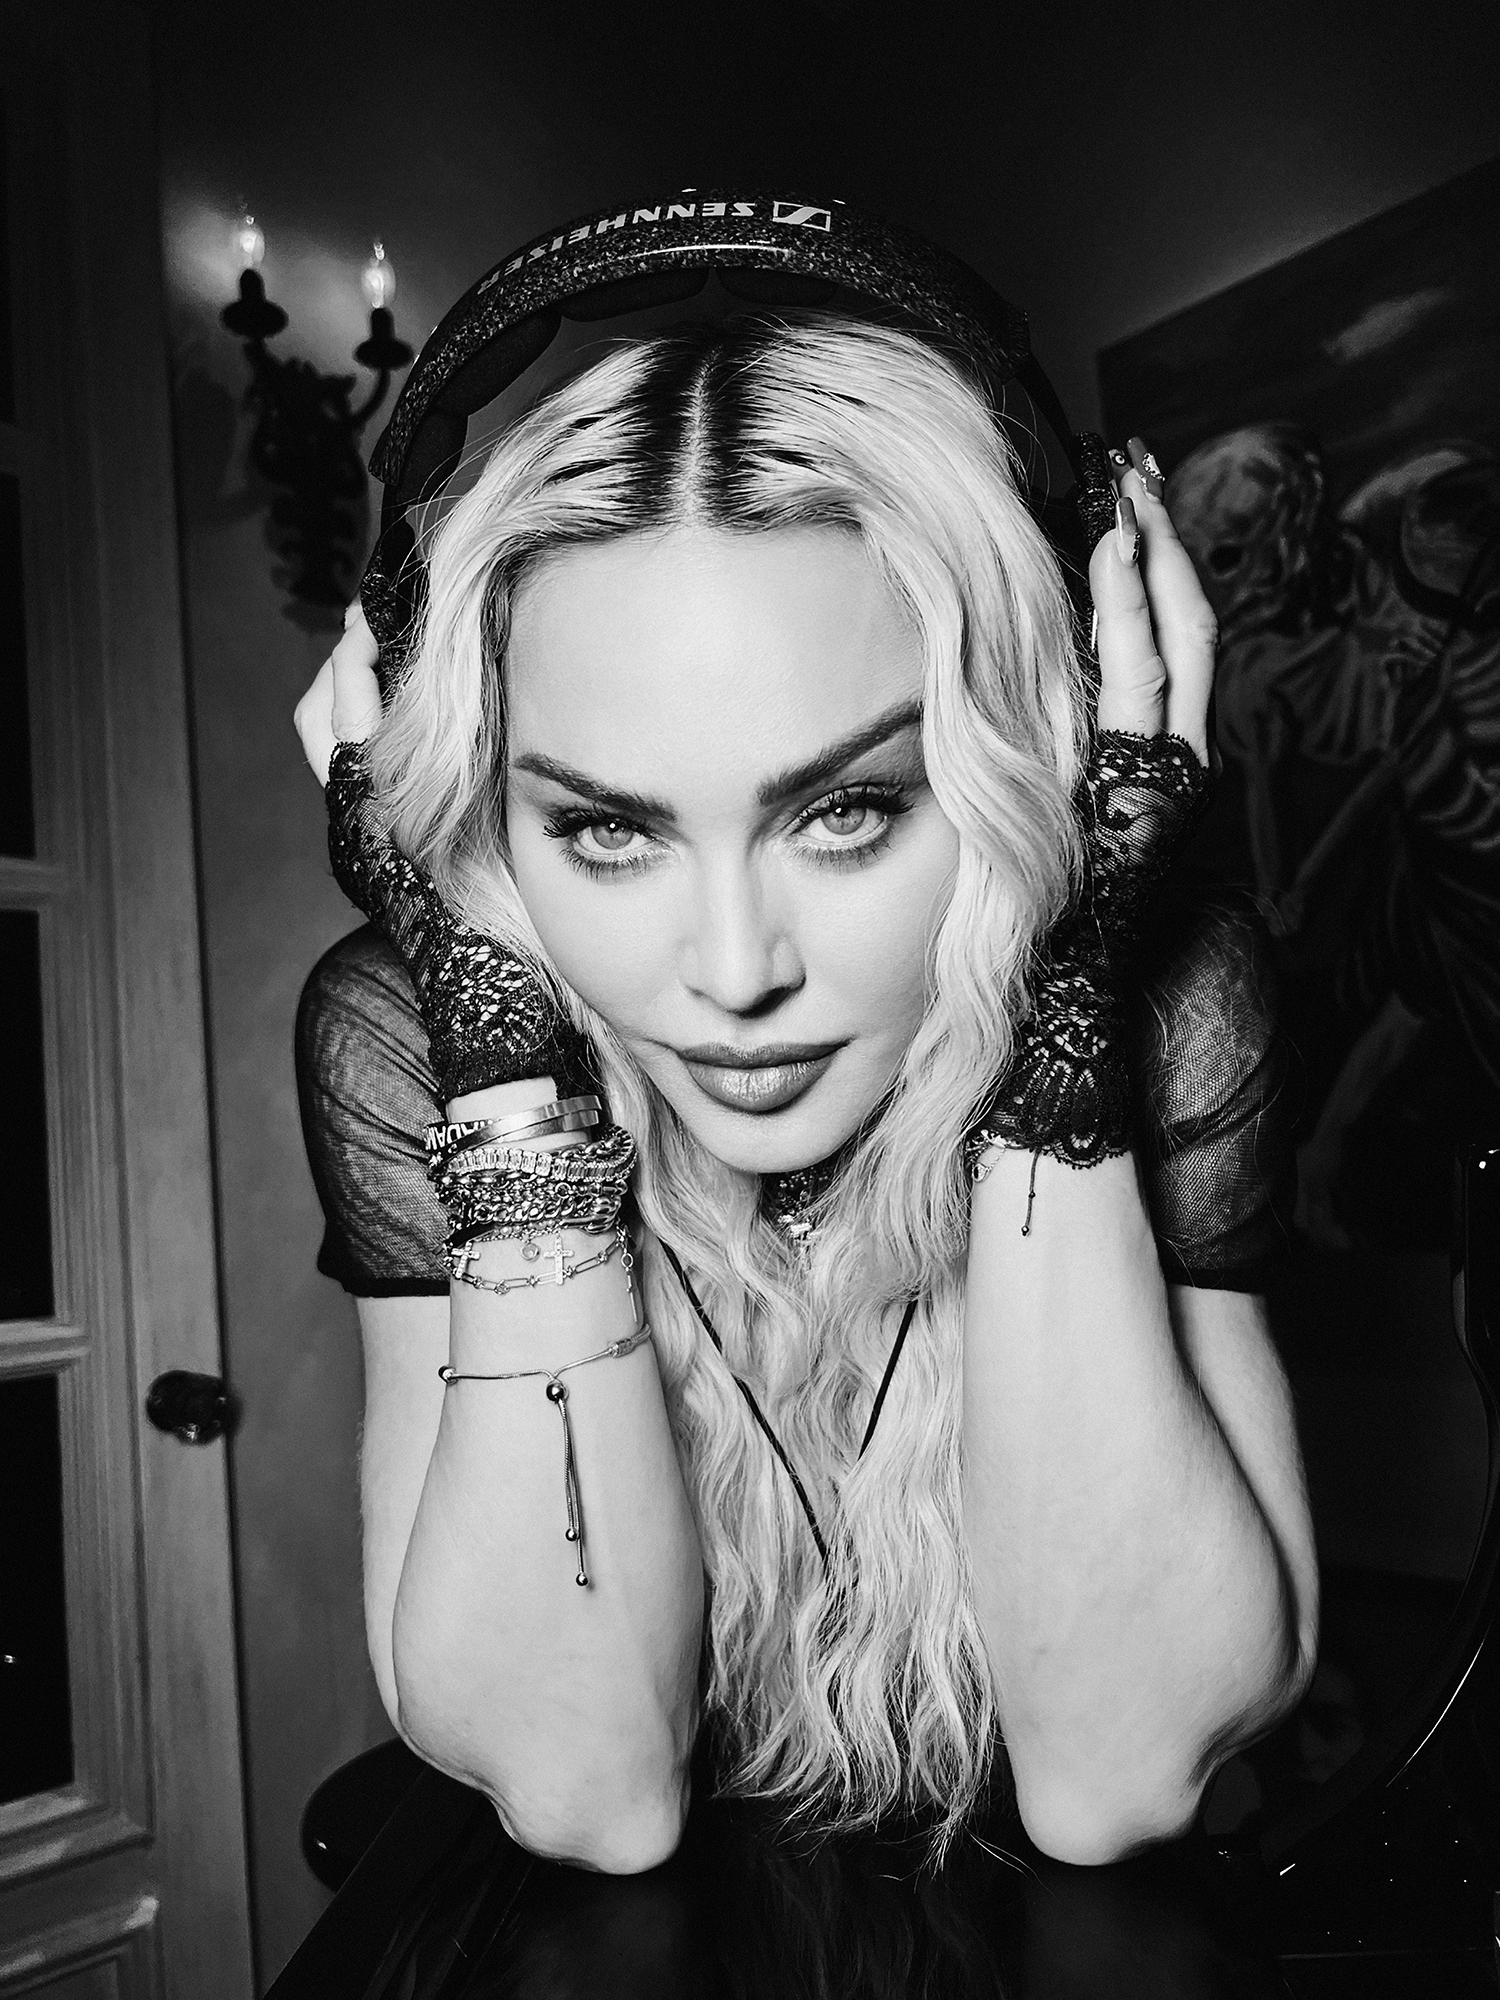  Madonna | Photographed by Ricardo Gomes